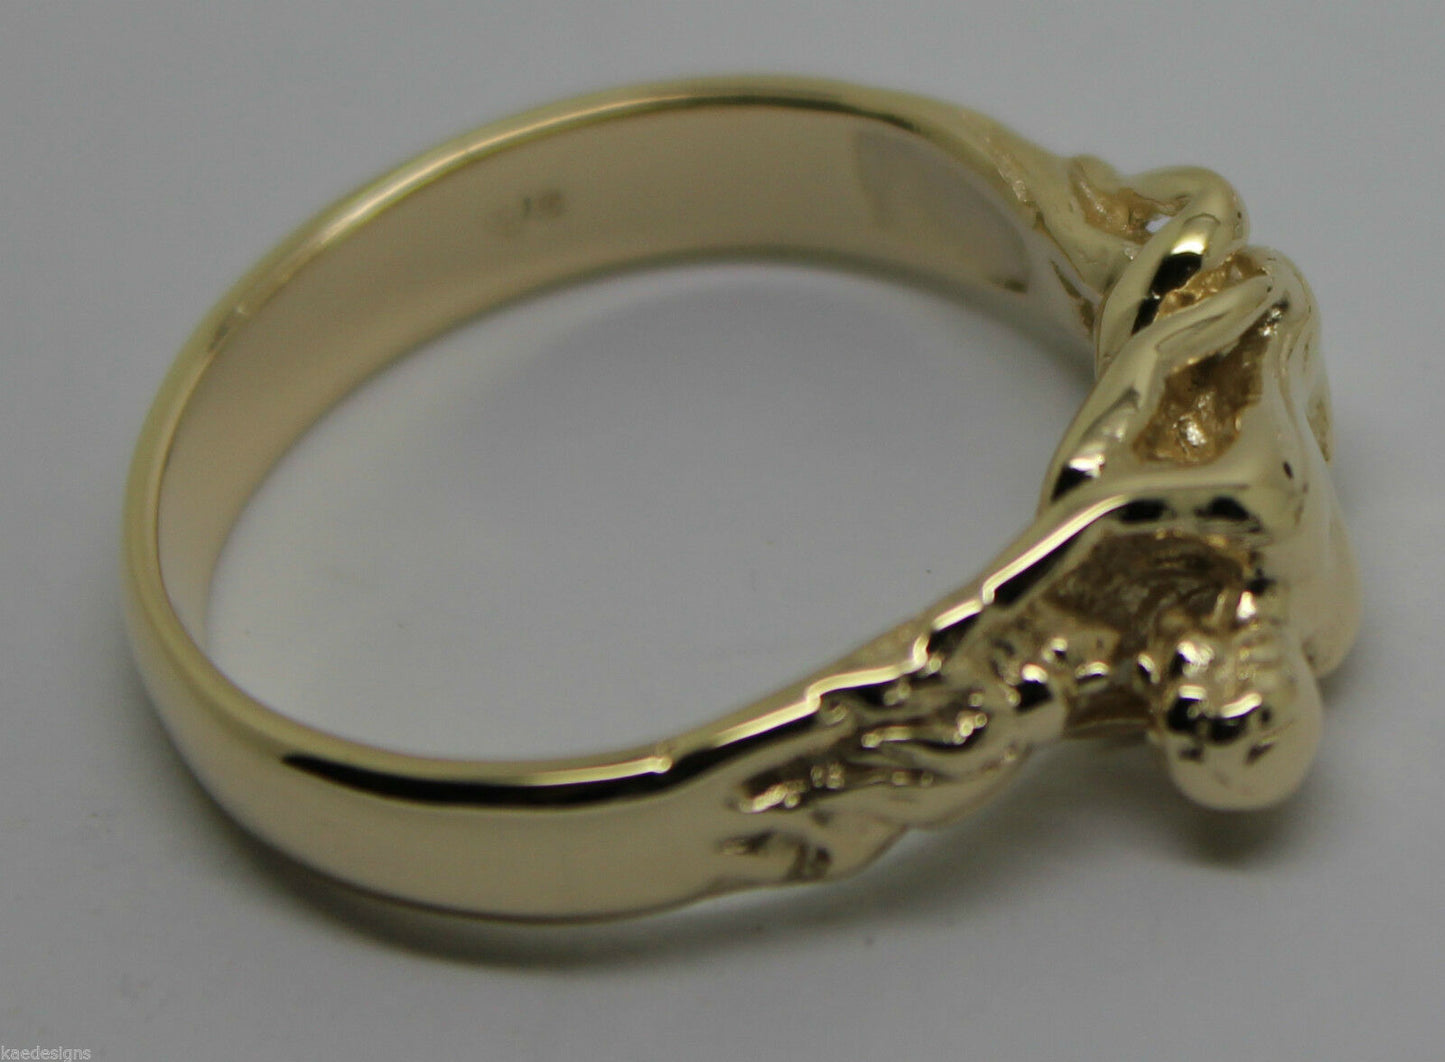 Size Q, Genuine 9kt 9ct Genuine Solid Yellow, Rose or White Gold Making Love Ring  276